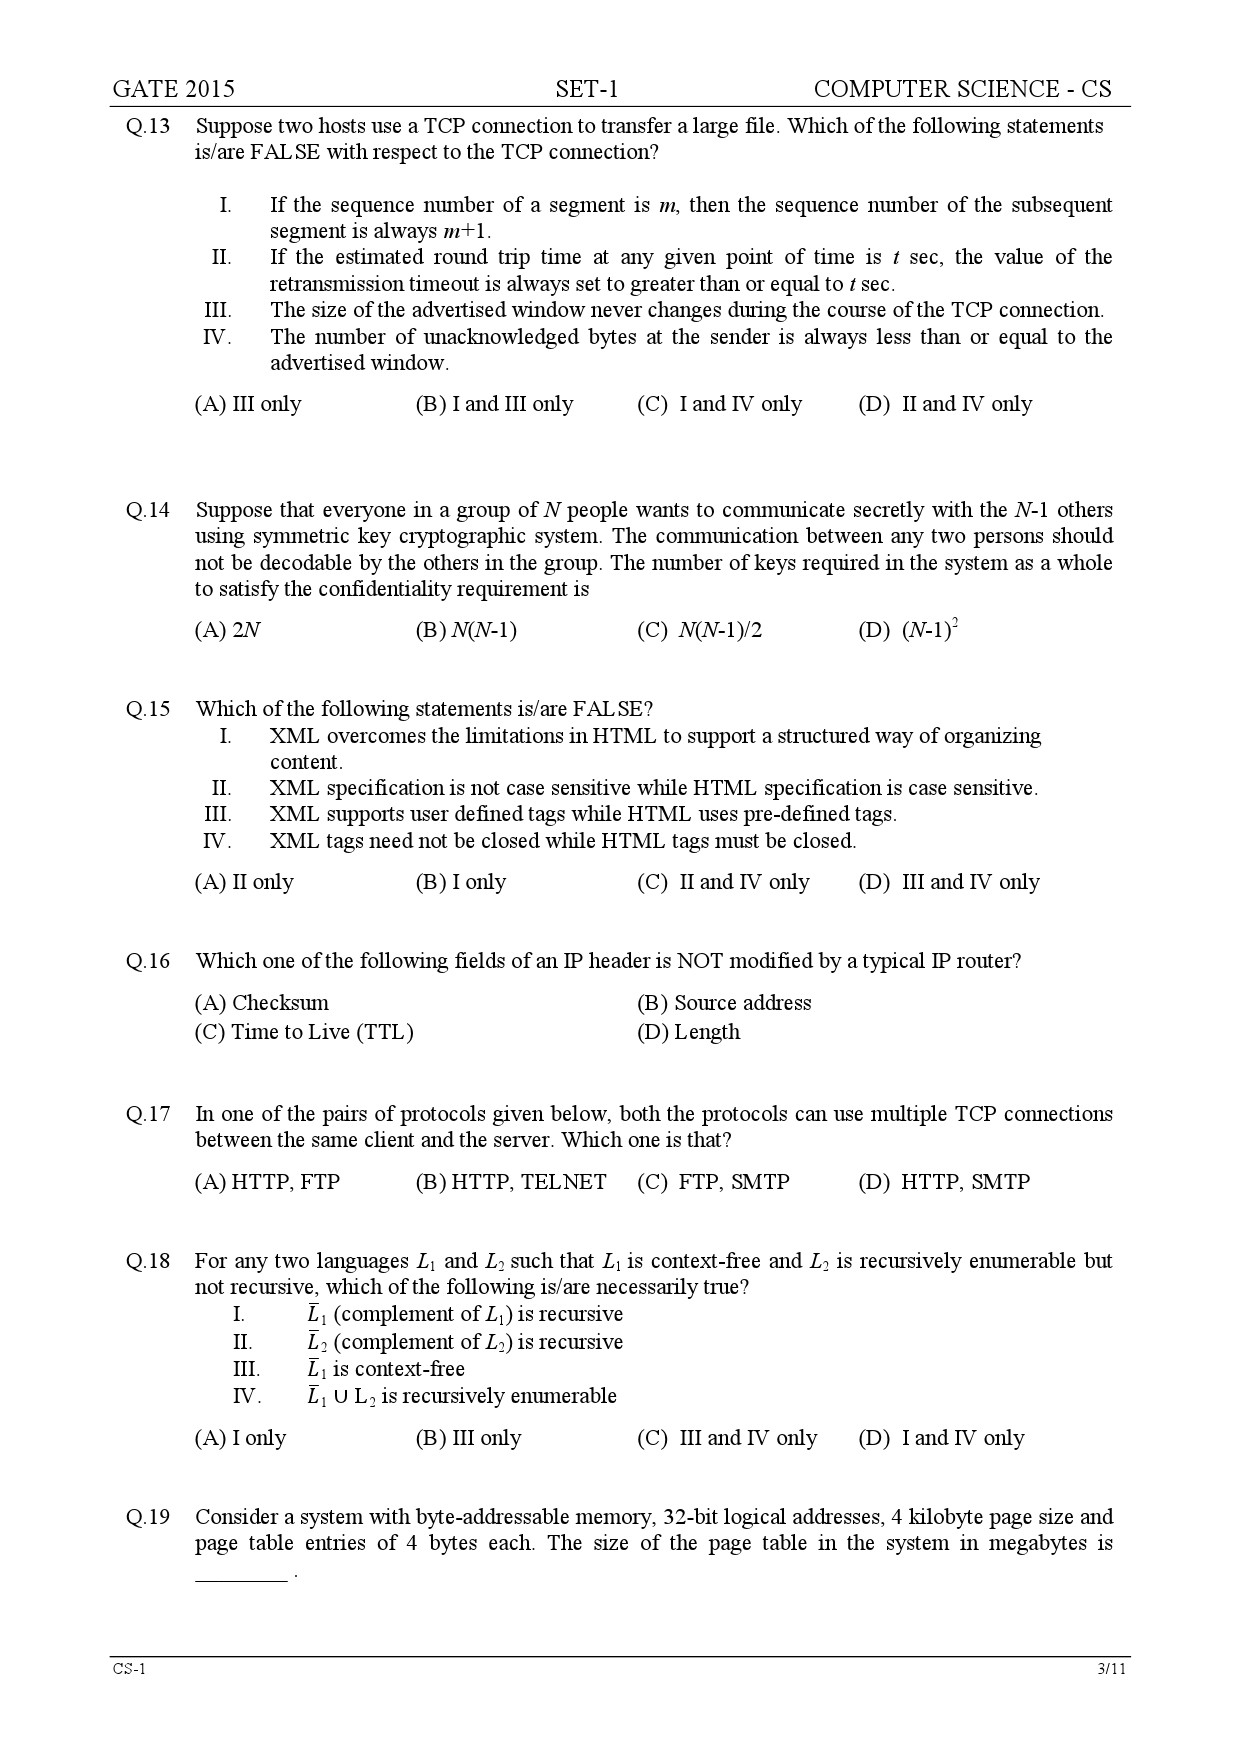 GATE Exam Question Paper 2015 Computer Science and Information Technology Set 1 3